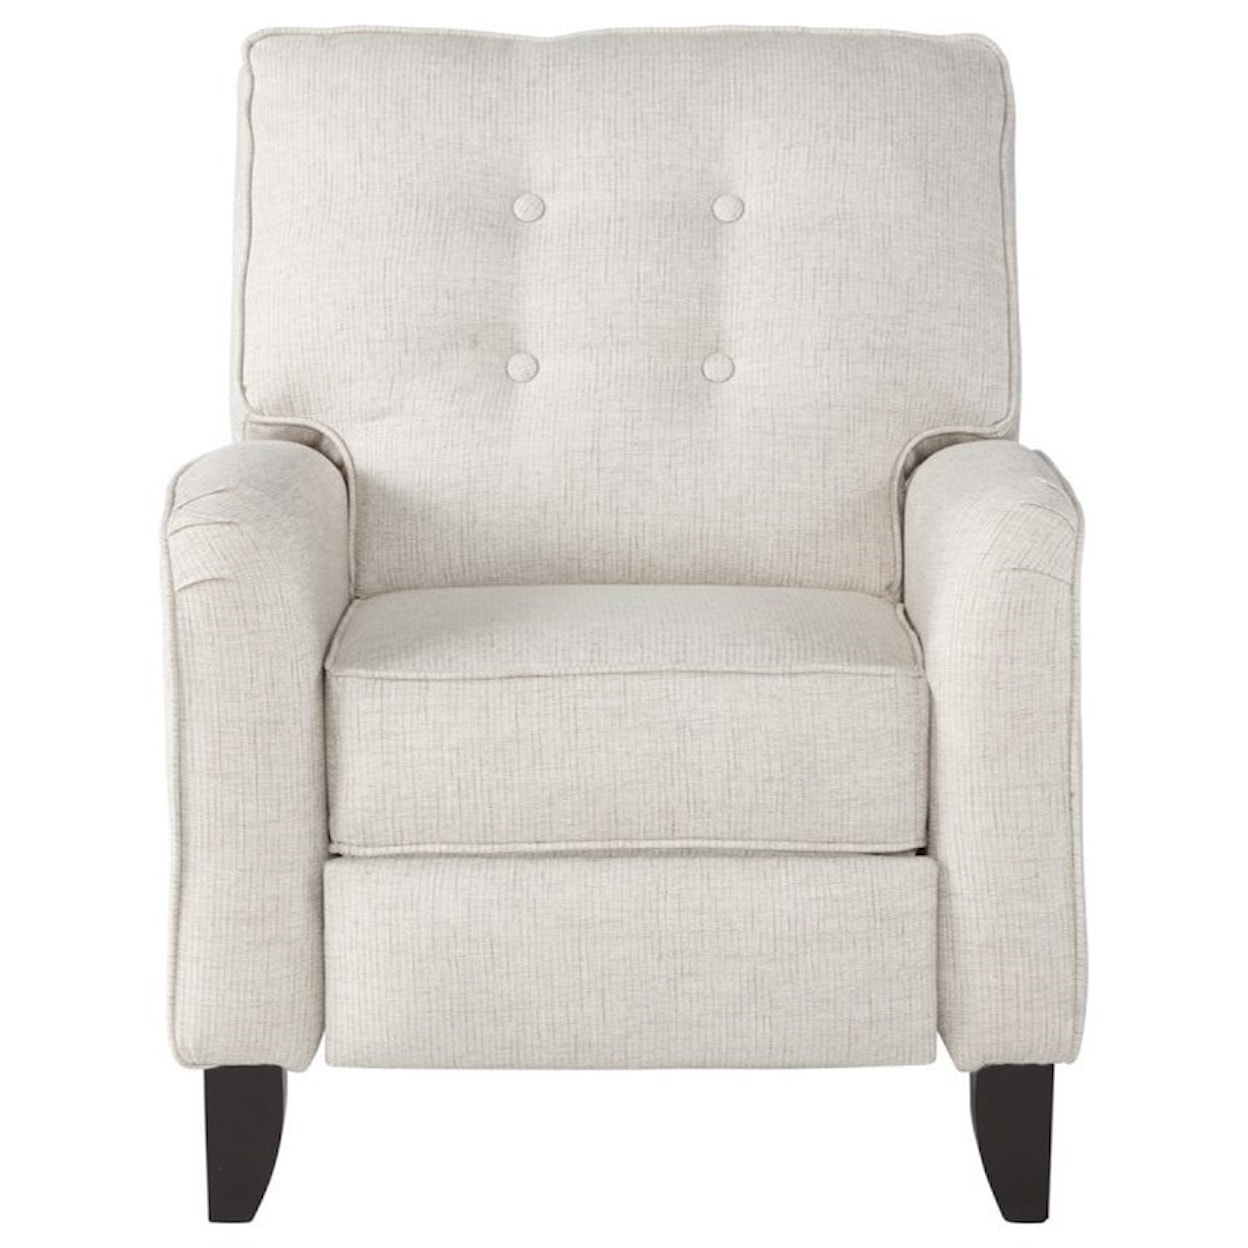 Serta Upholstery by Hughes Furniture 230 Reclining Chair